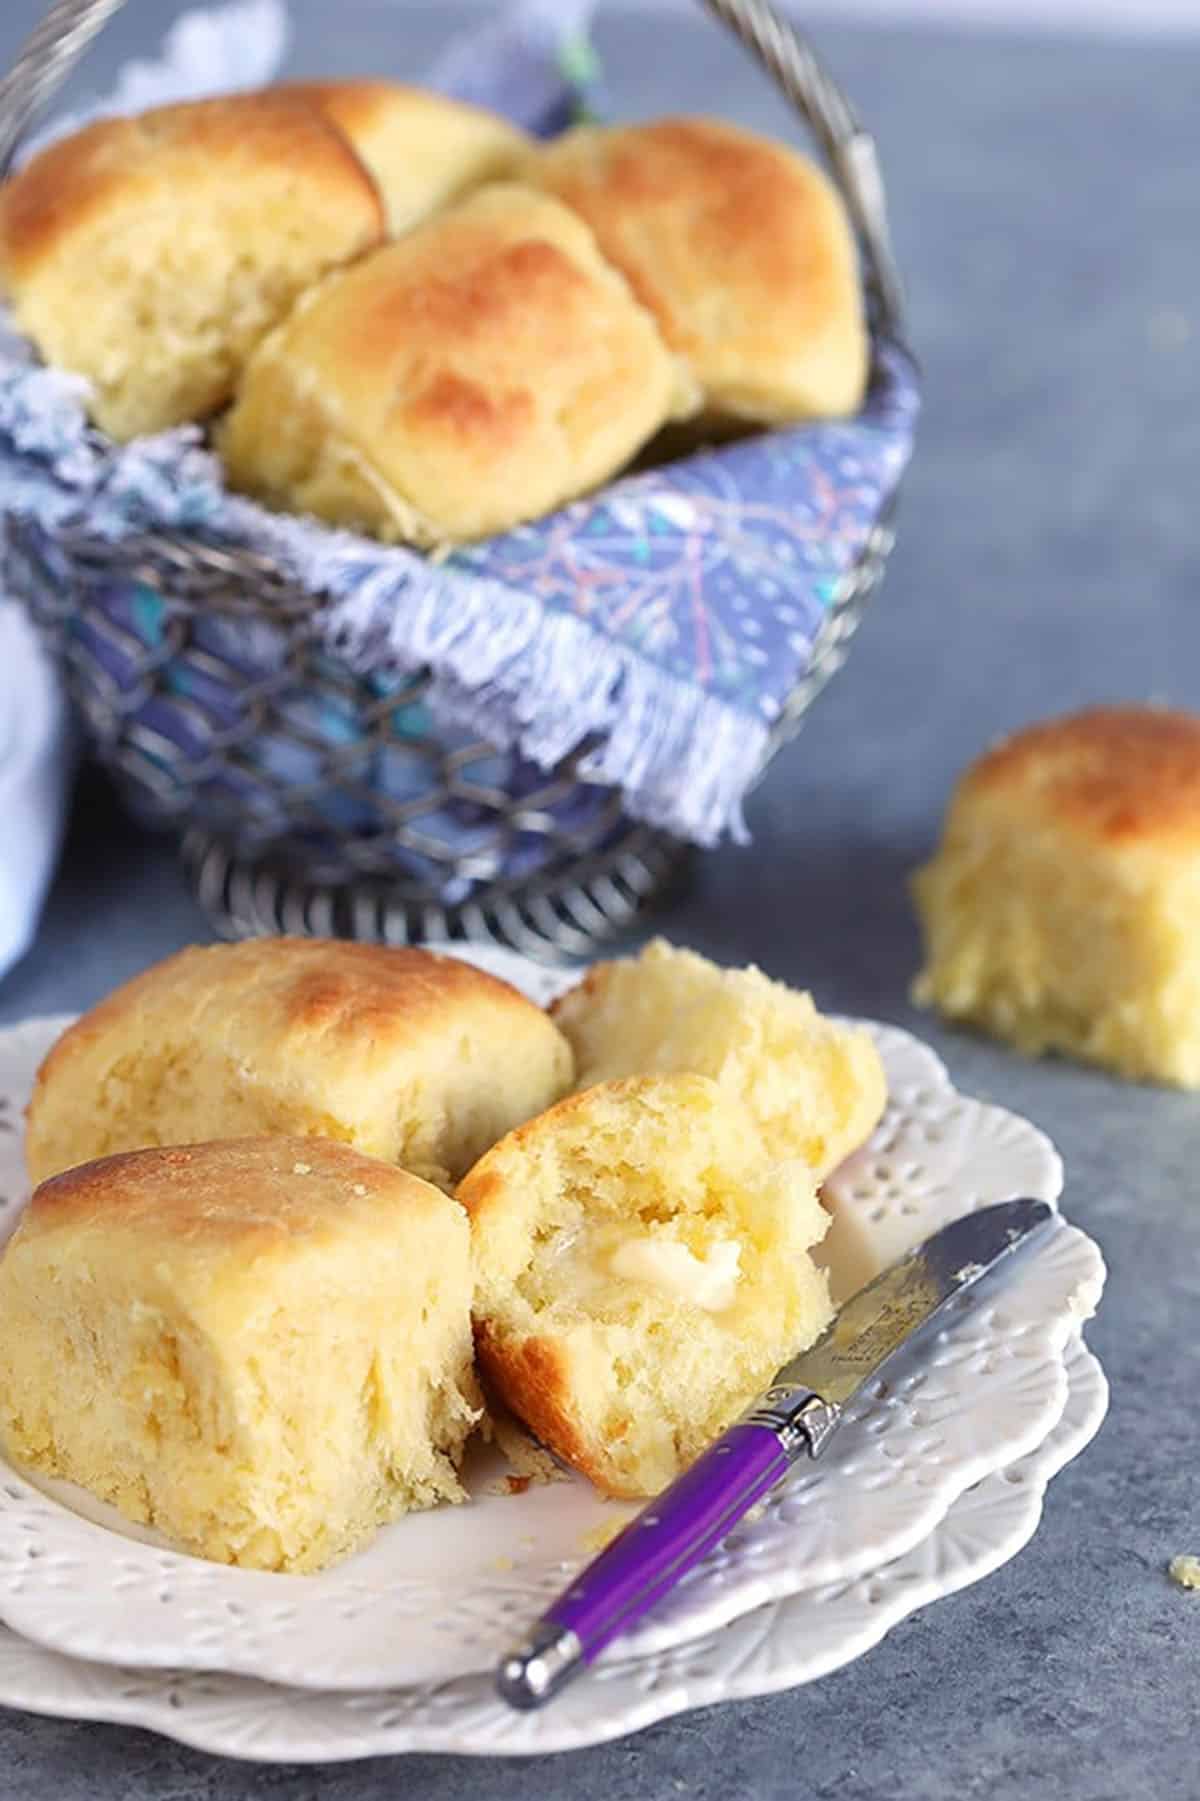 Dinner rolls in a basket with a dinner roll on a white plate.